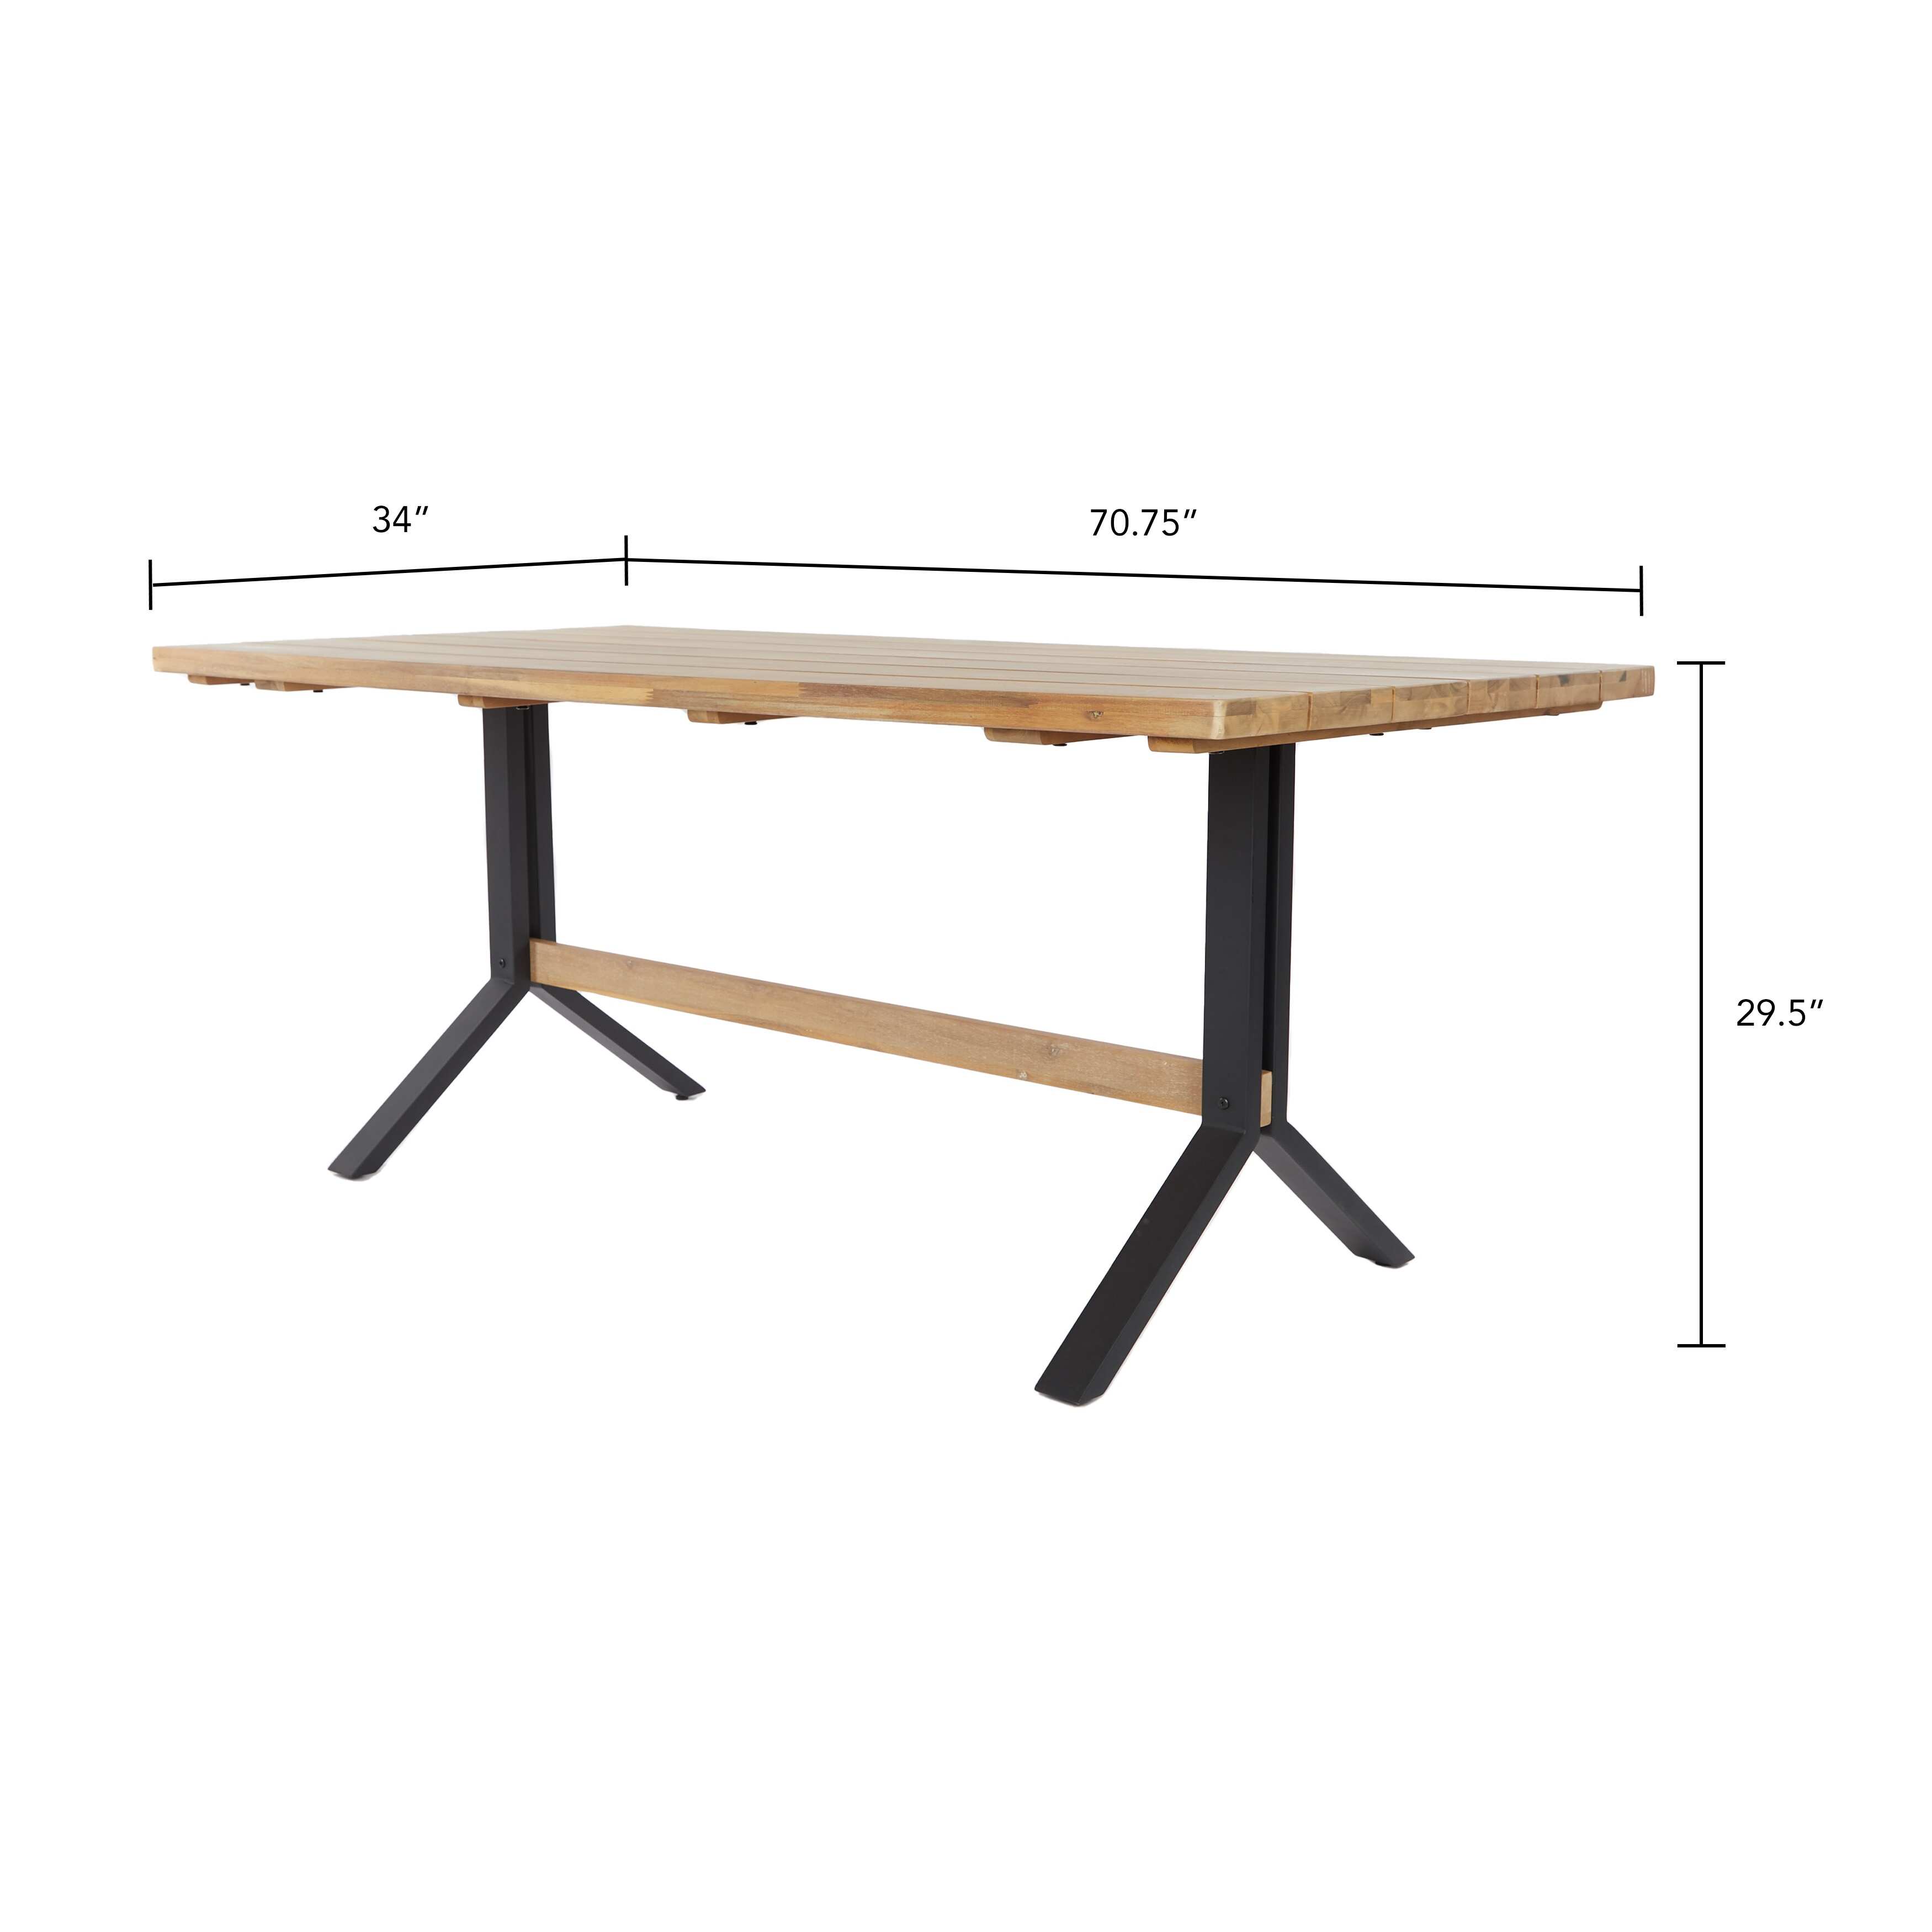 SEI Furniture Shenley Weather-Resistant Natural Wood Dining Table